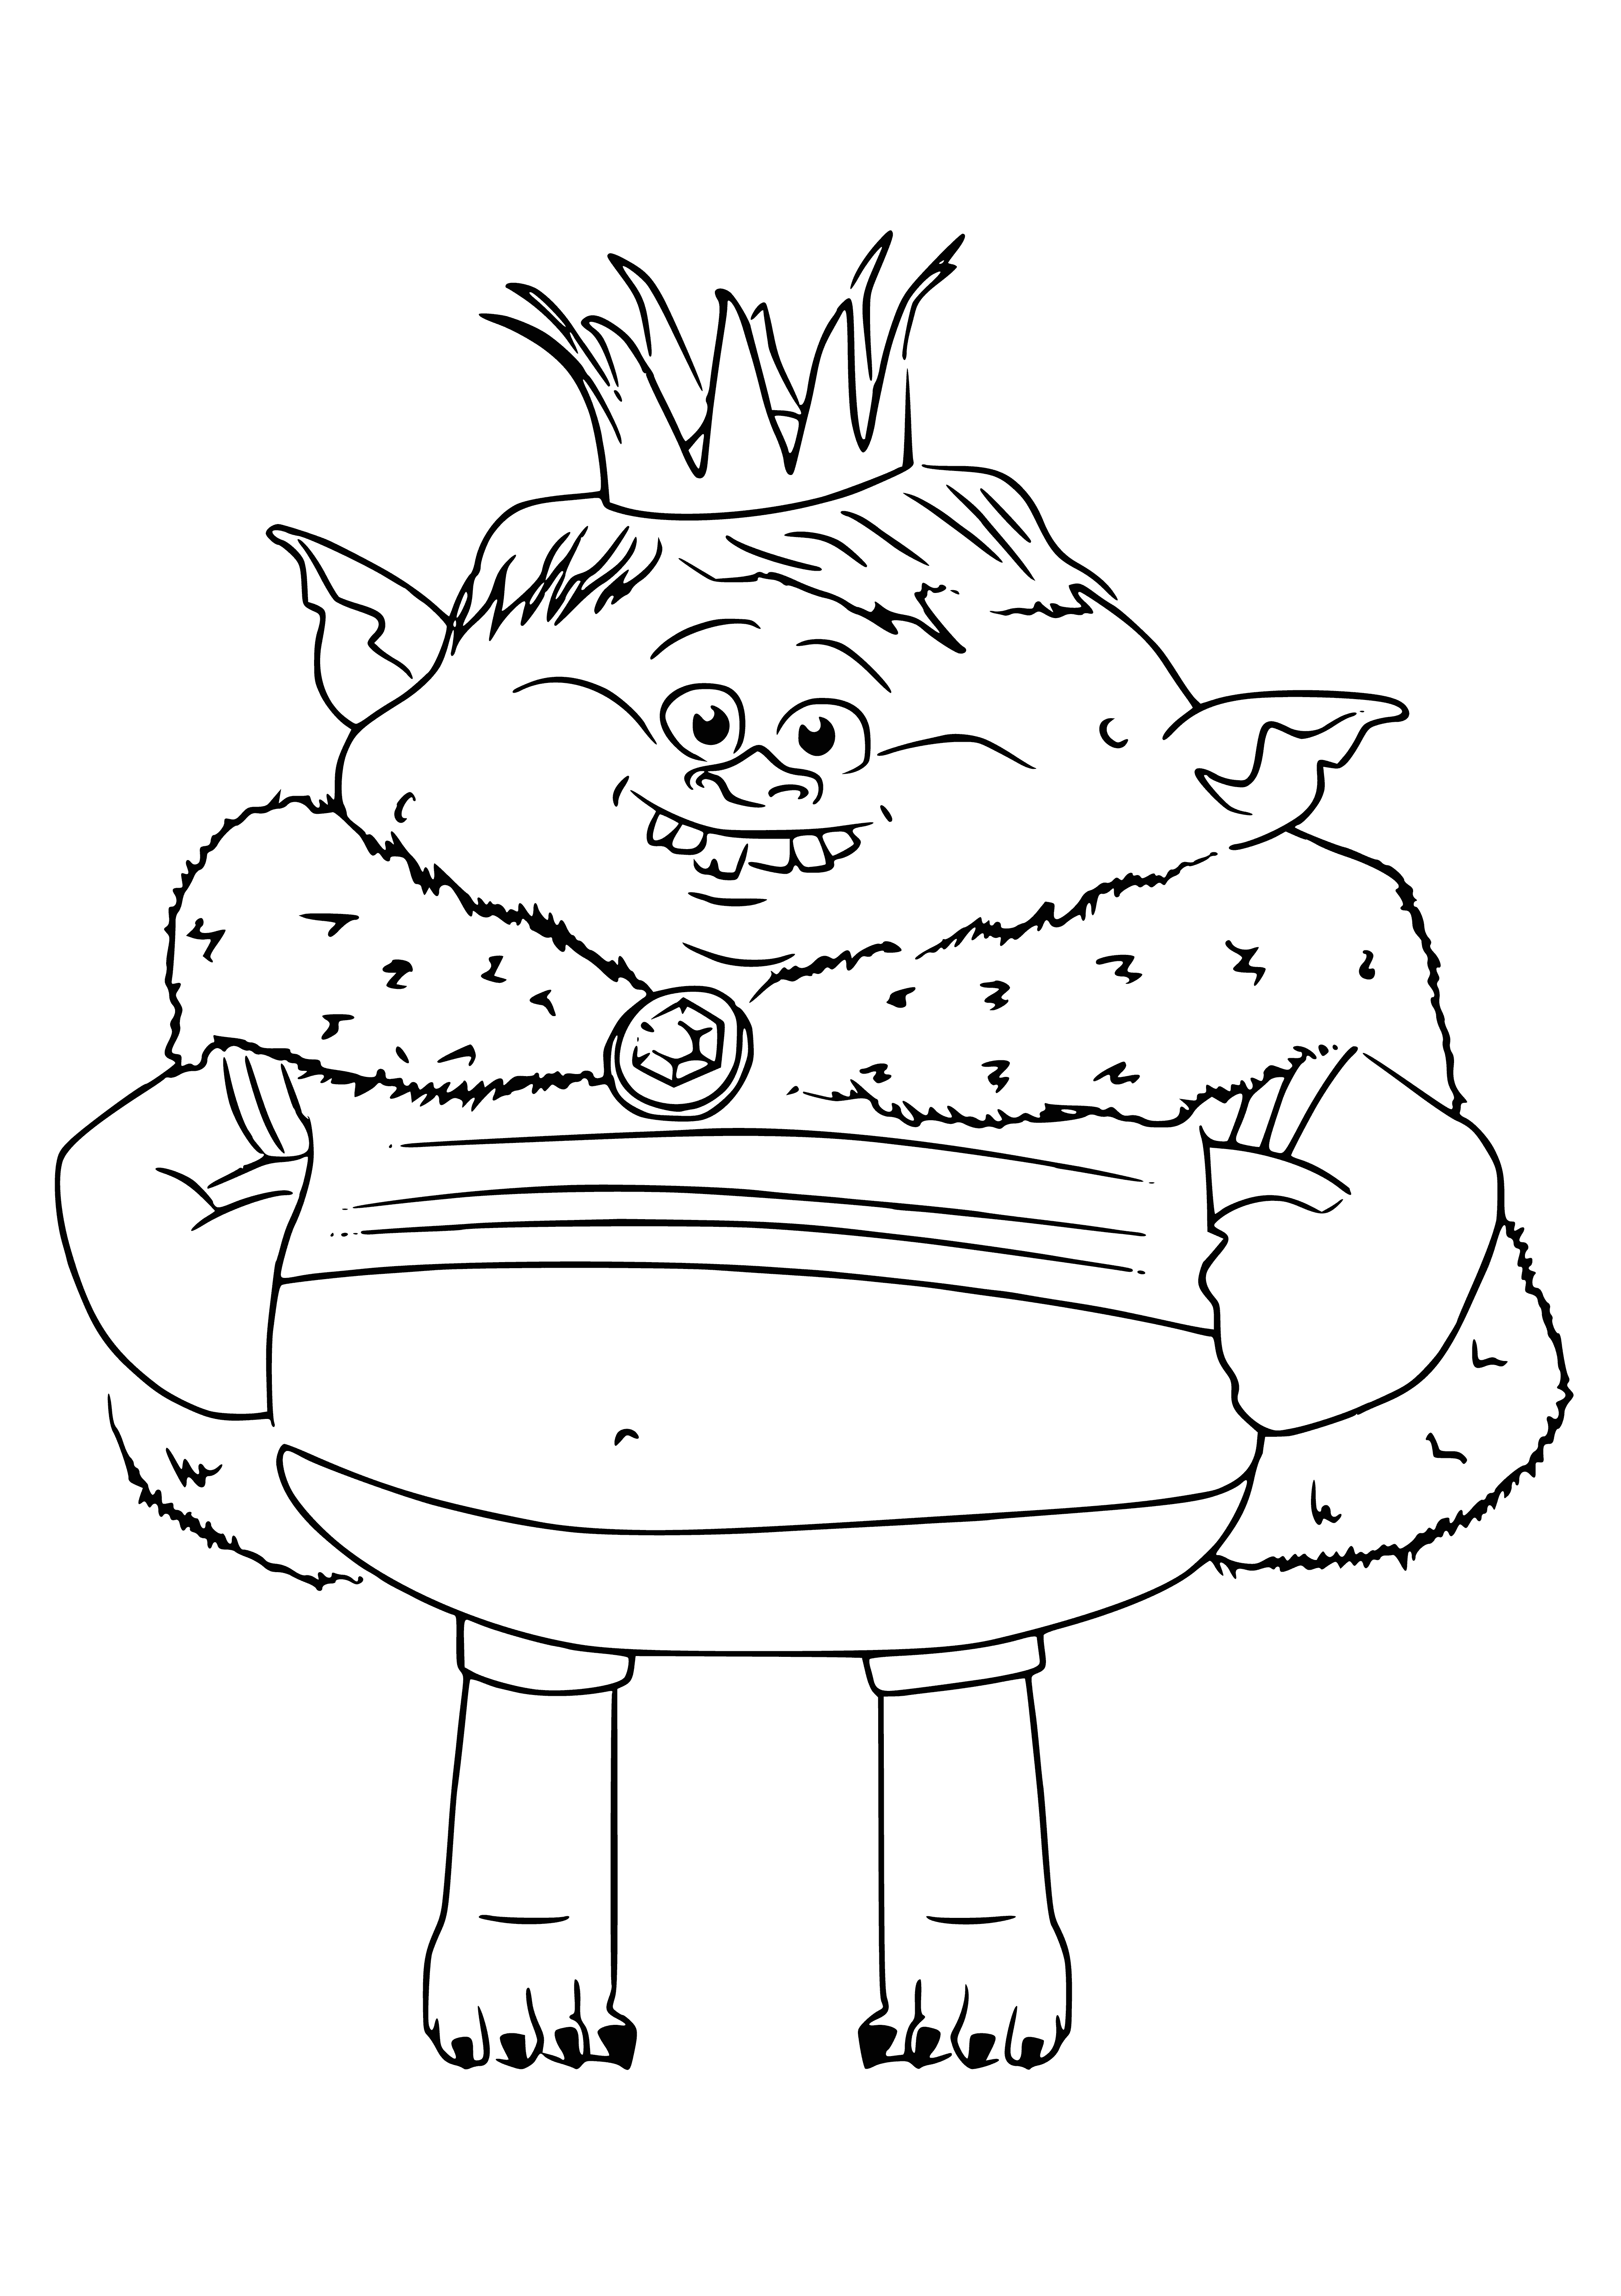 King Cartilage coloring page